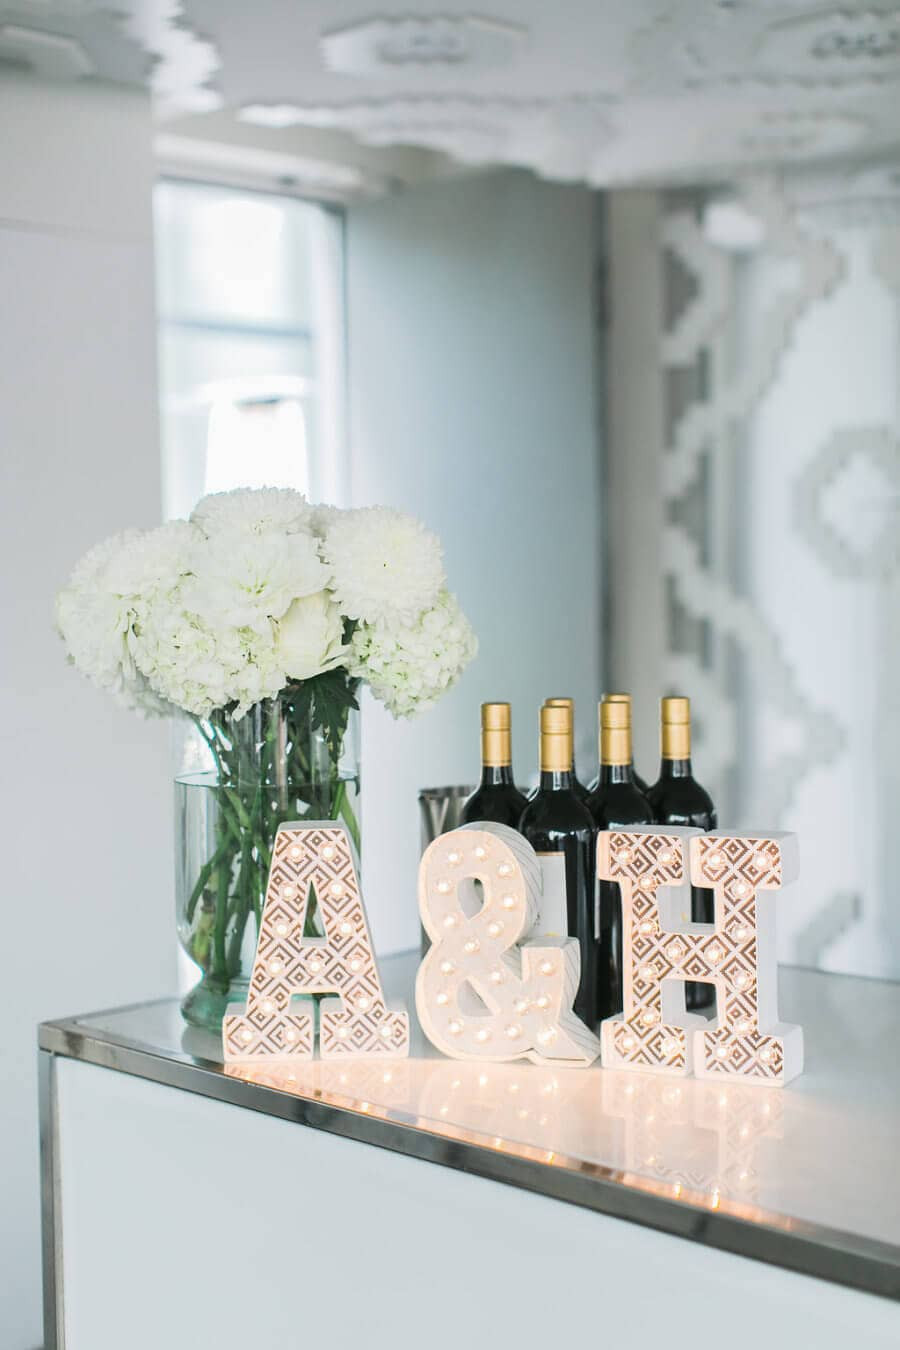 Ideas For Engagement Party Decorations
 25 Amazing DIY Engagement Party Decoration Ideas for 2019